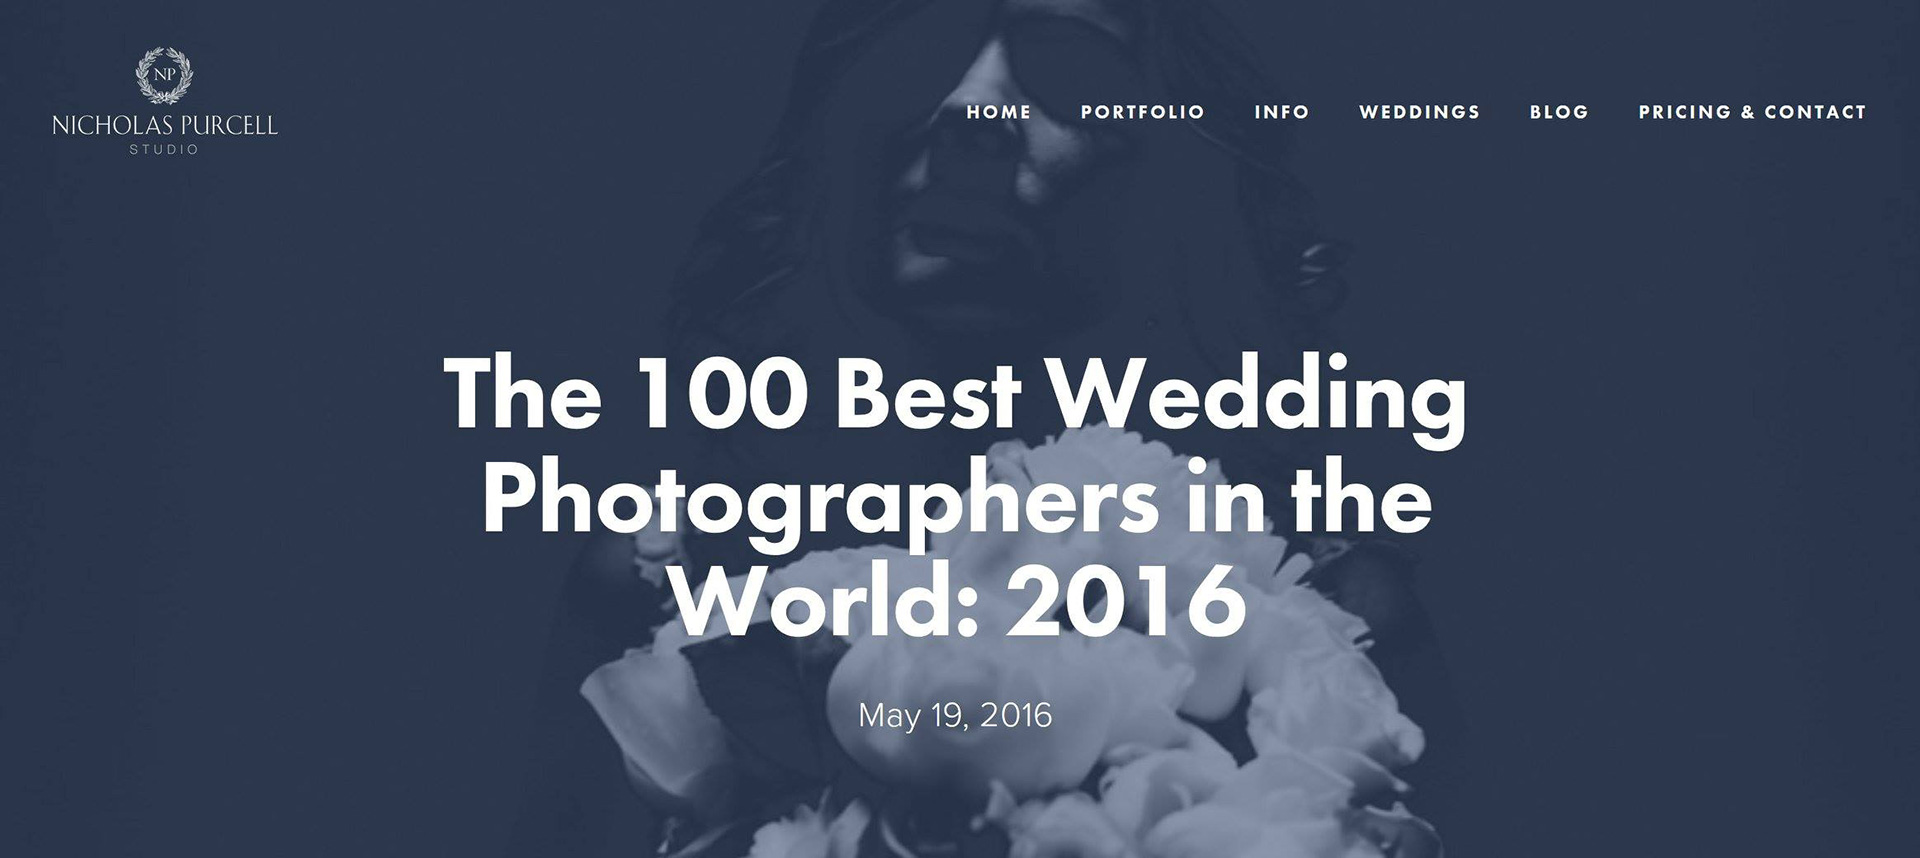 Named one of the ‘100 Best Wedding Photographers in the World 2016’